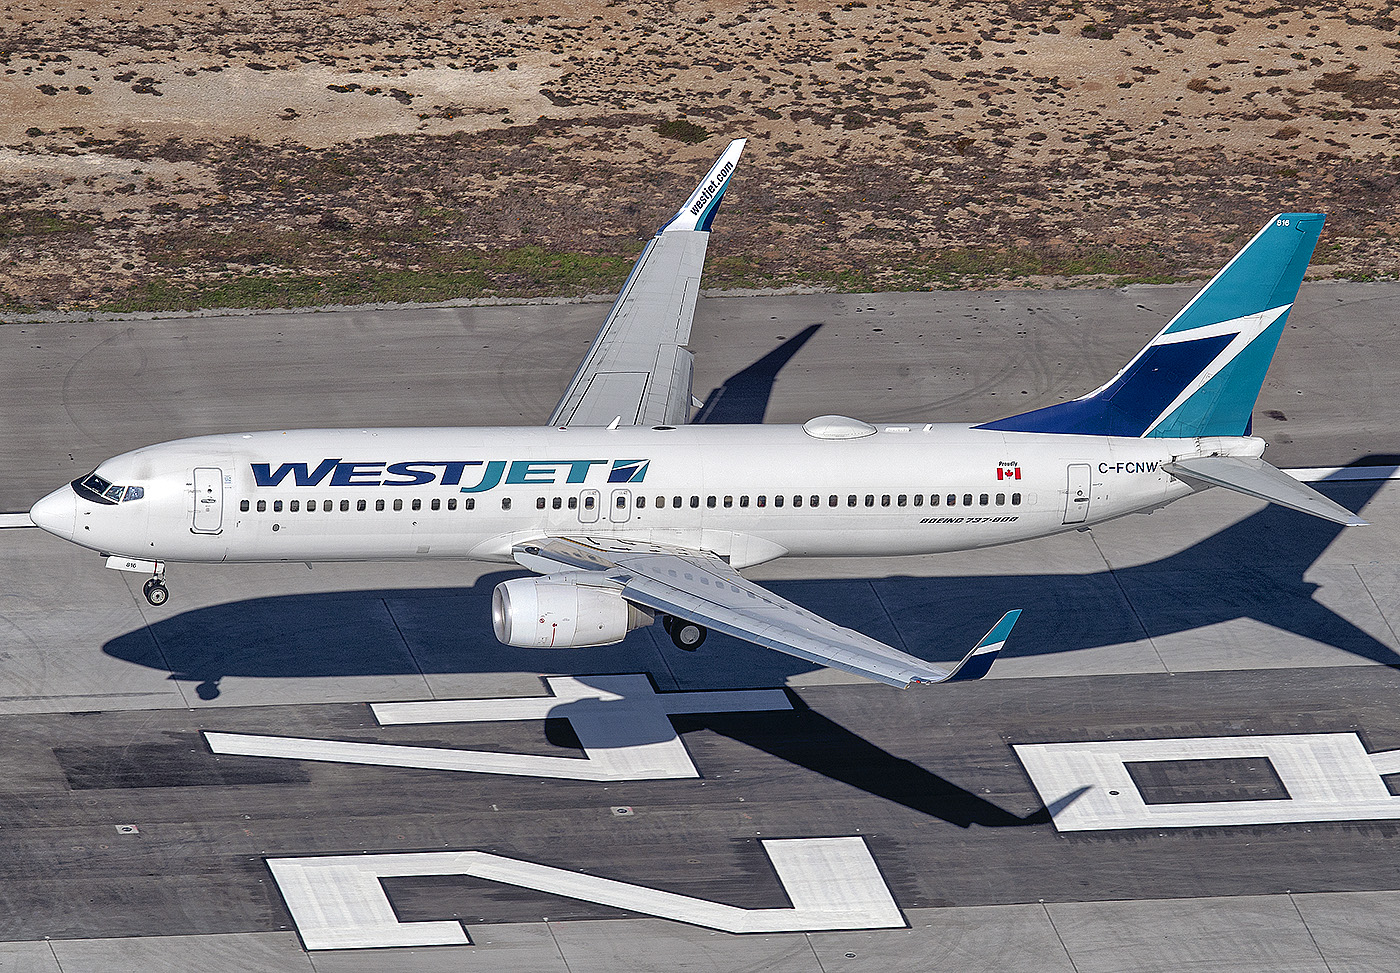 A New Old WestJet - Airline Weekly